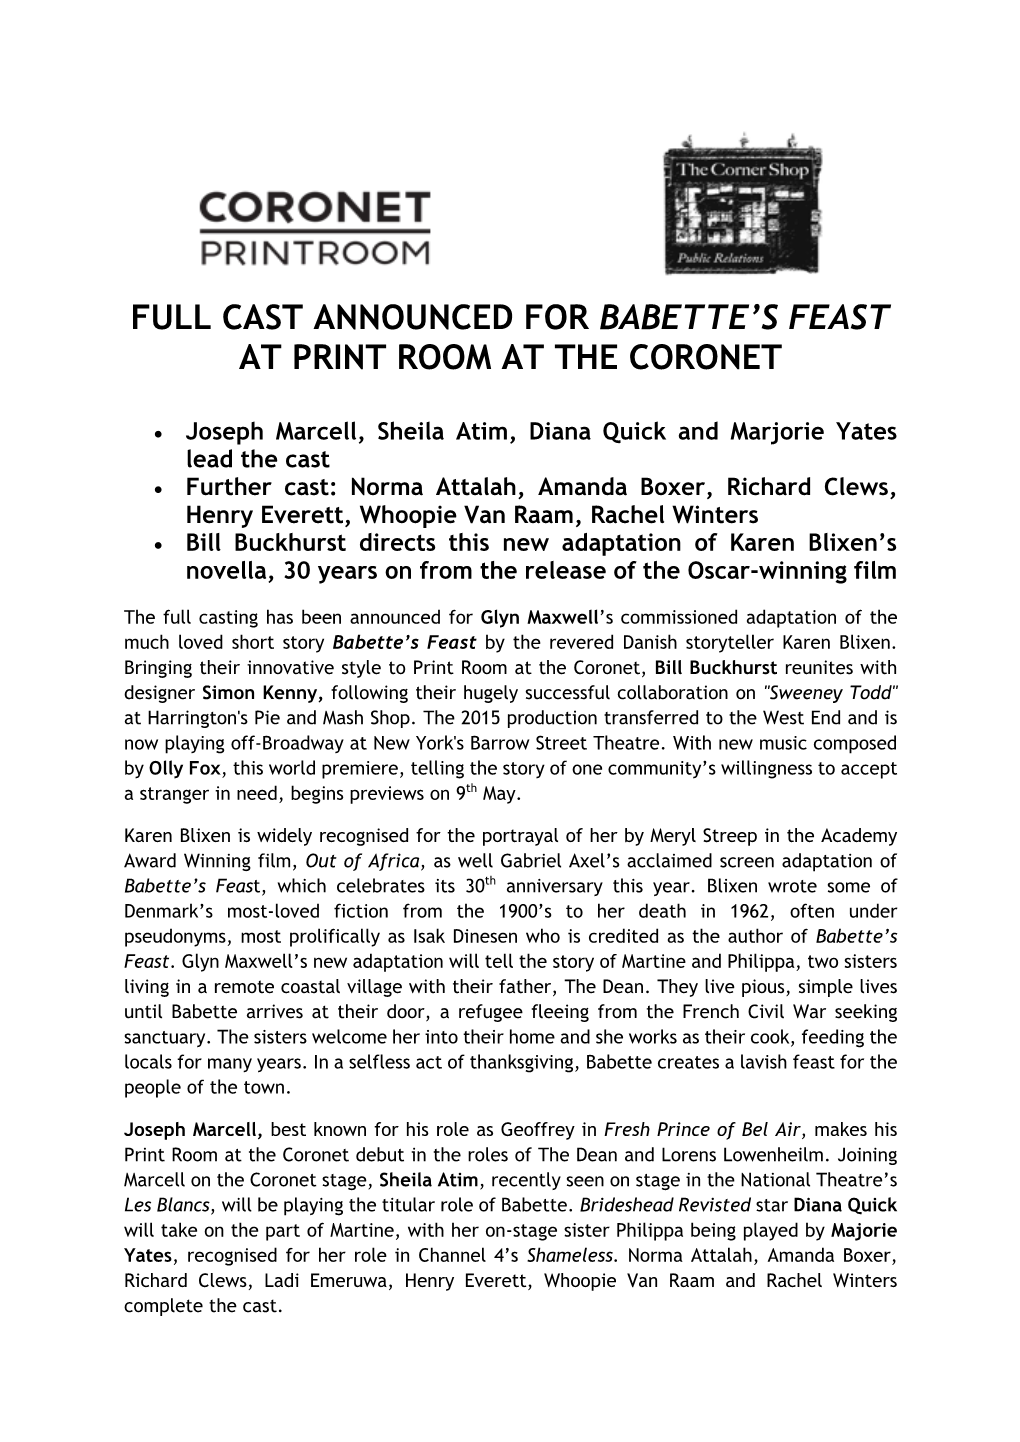 Full Cast Announced for Babette's Feast at Print Room at the Coronet